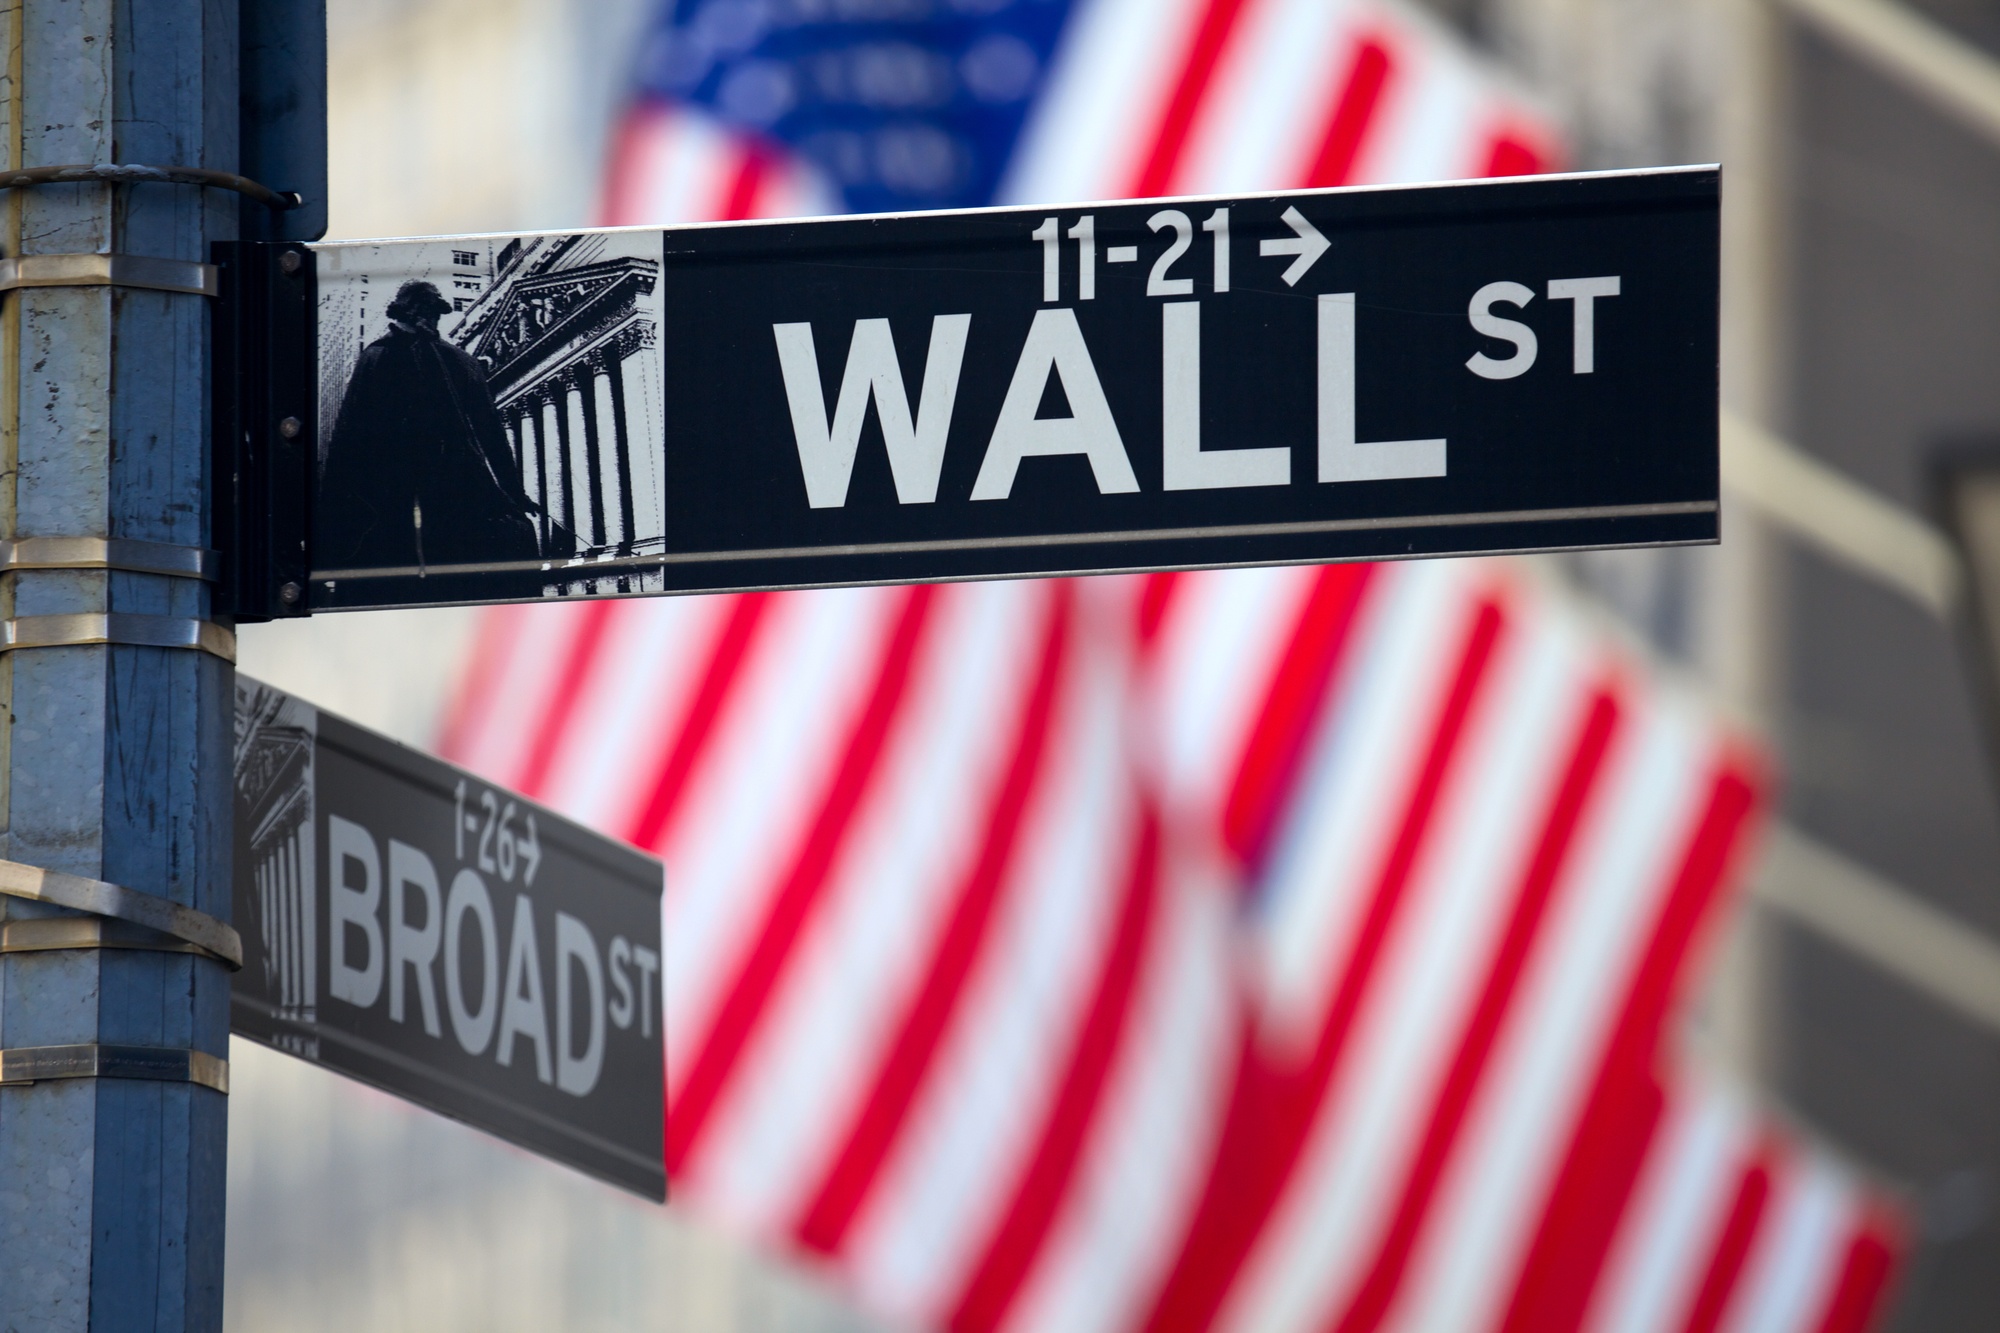 Self Directed IRAs can help protect you from stock market crashes